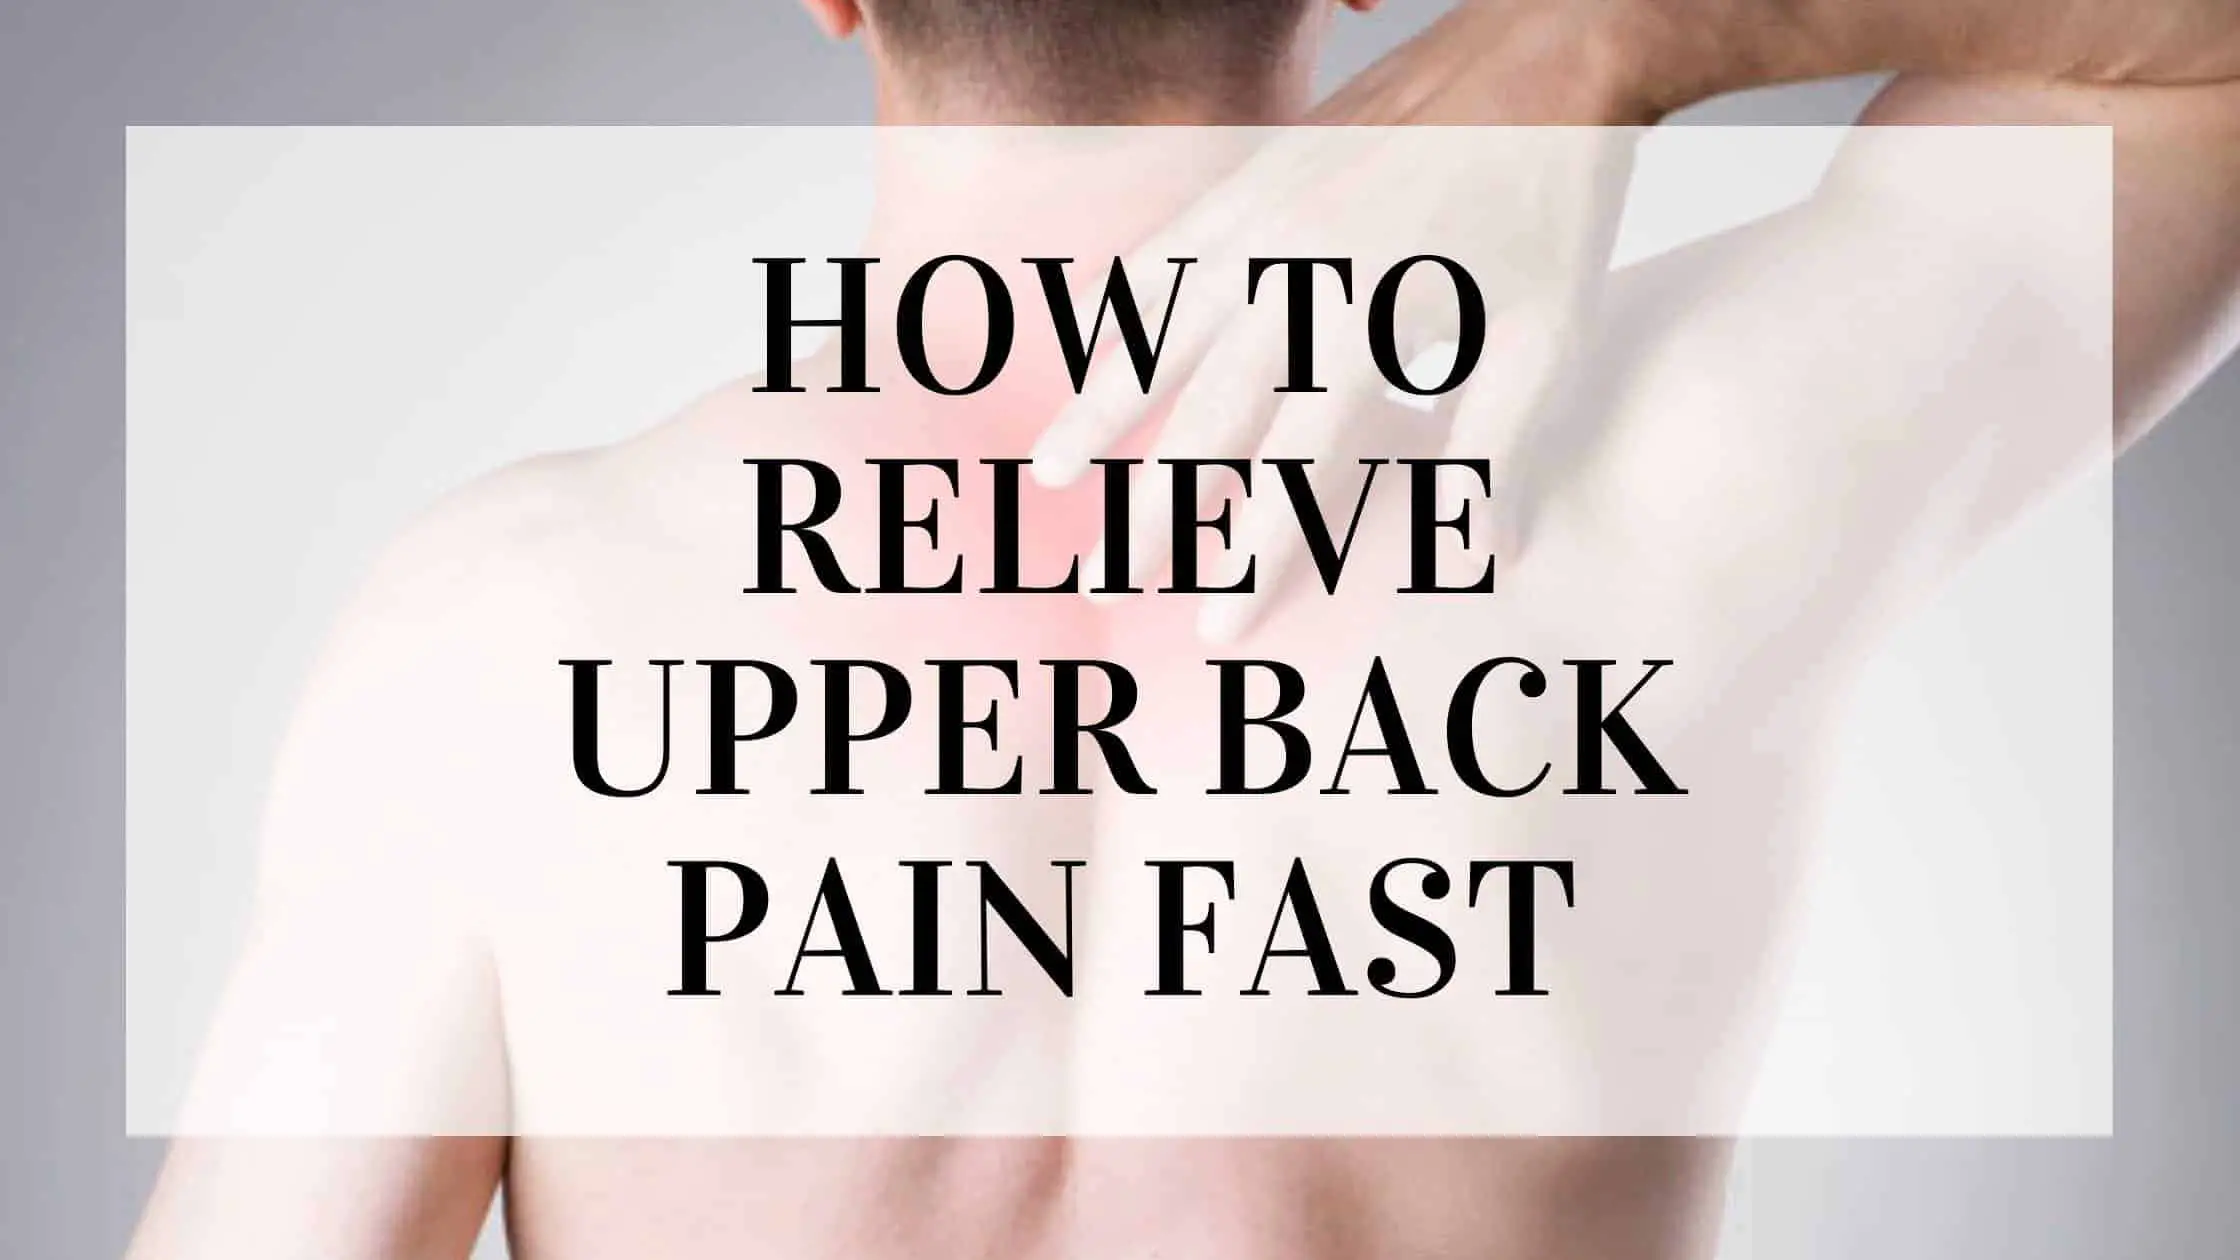 How to Relieve Upper Back Pain Fast